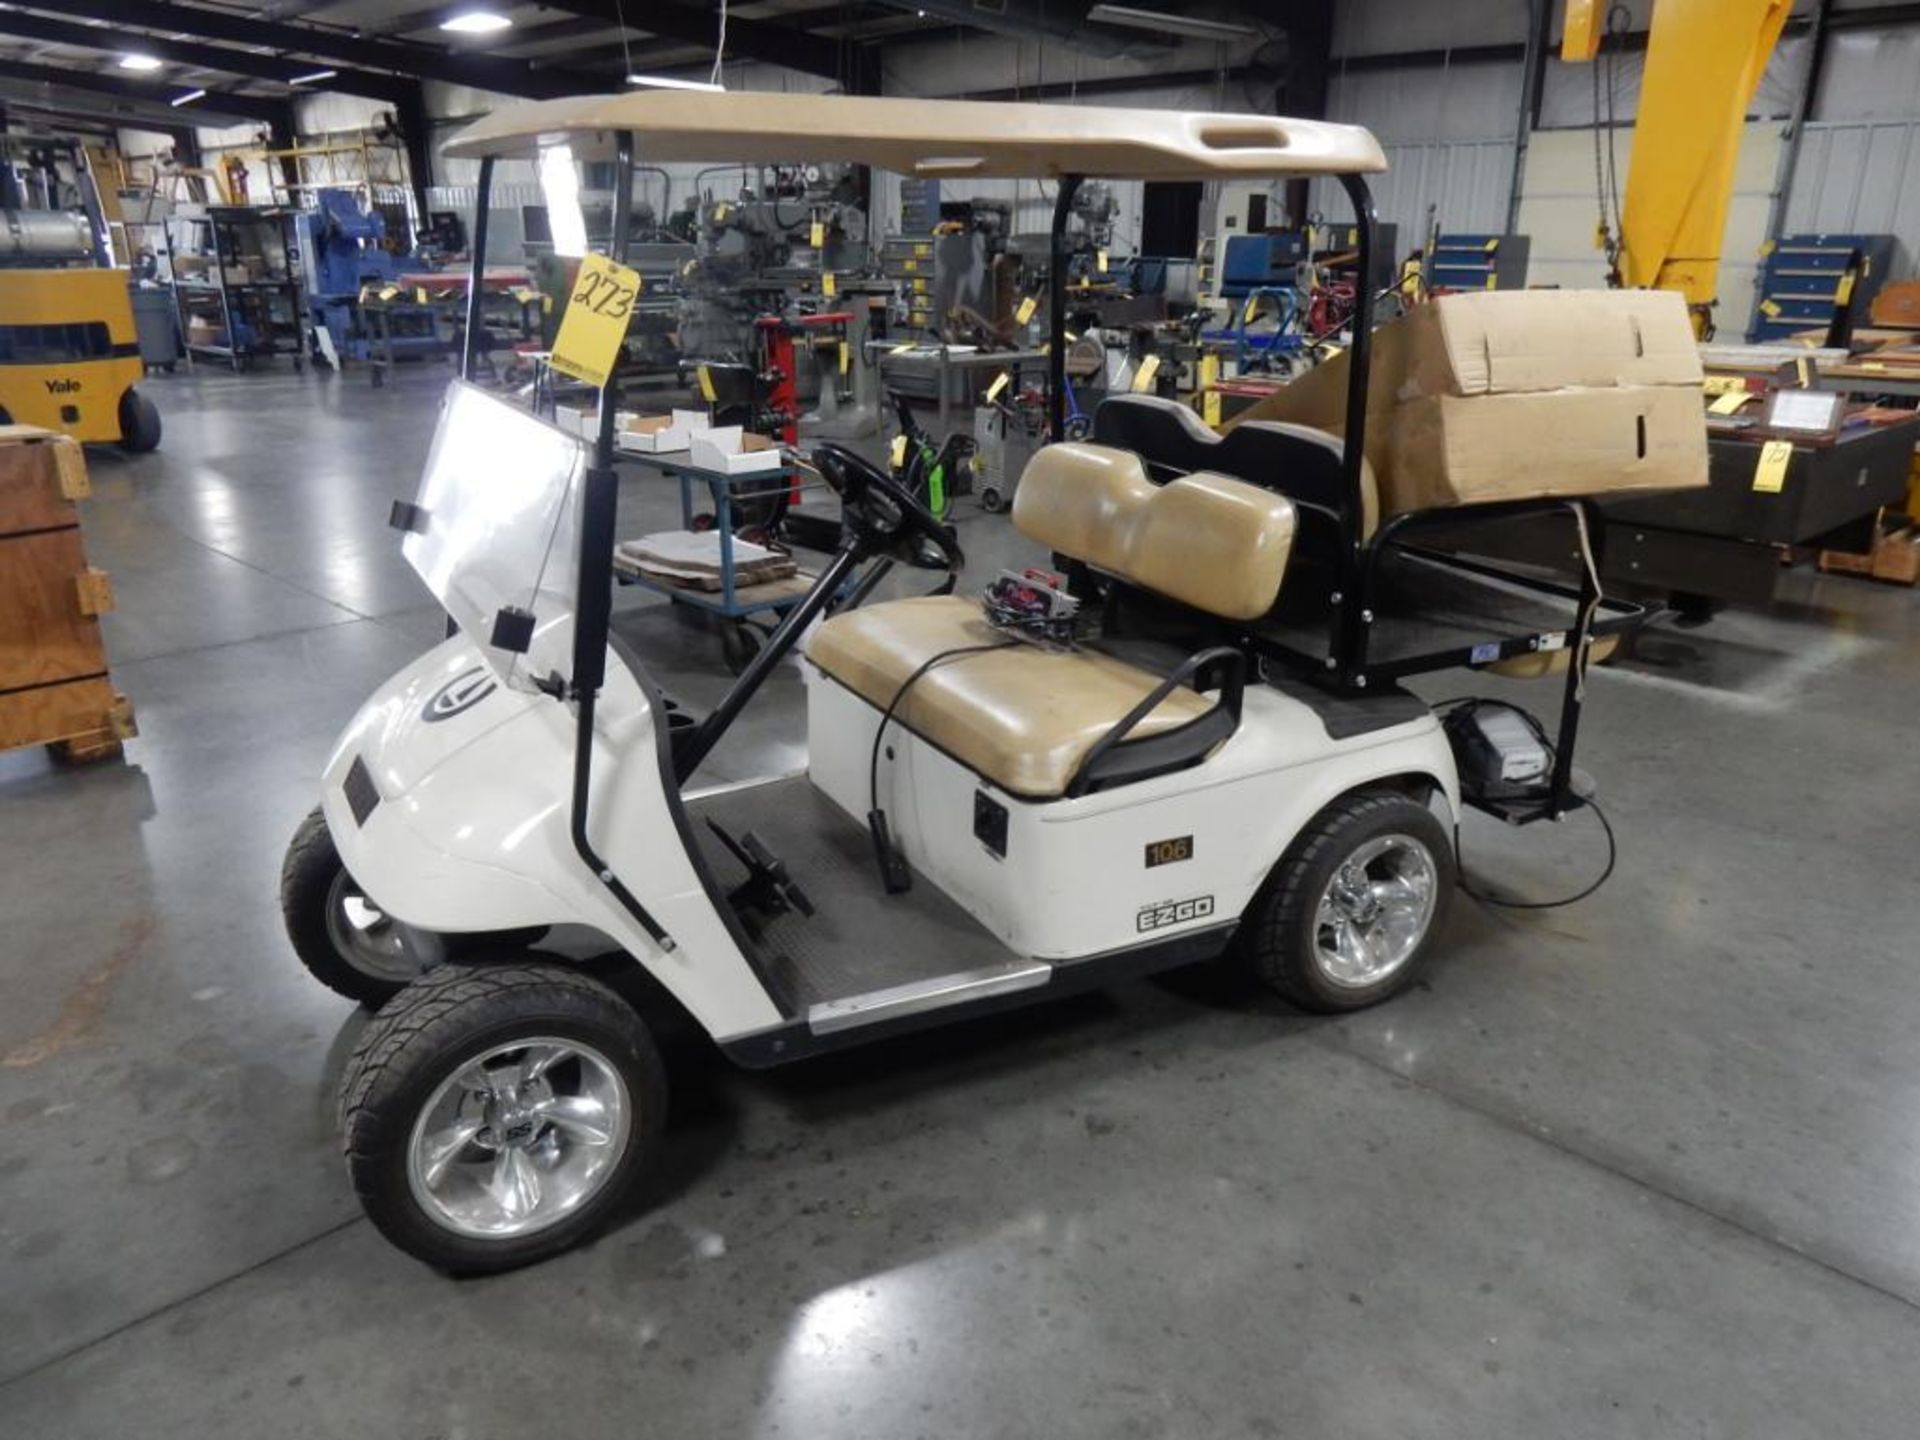 E-Z-GO GOLF CART, CANOPY, REAR FLIP SEAT, MAG WHEELS, WINDSHIELD, CHARGER